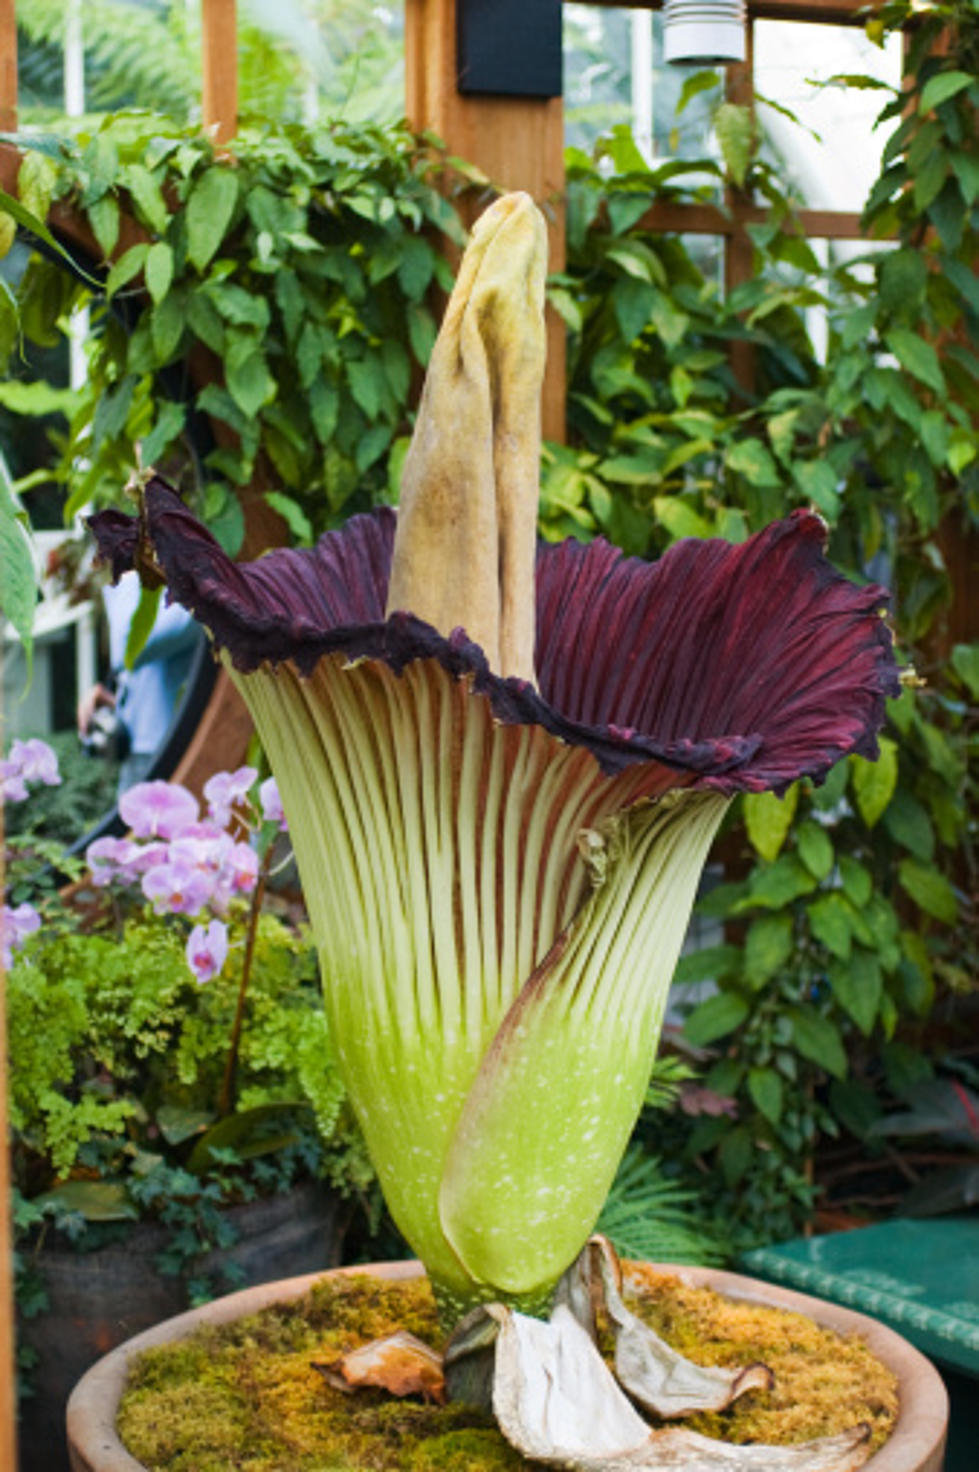 Rockford's Stinky 'Corpse Flower' May Bloom Soon